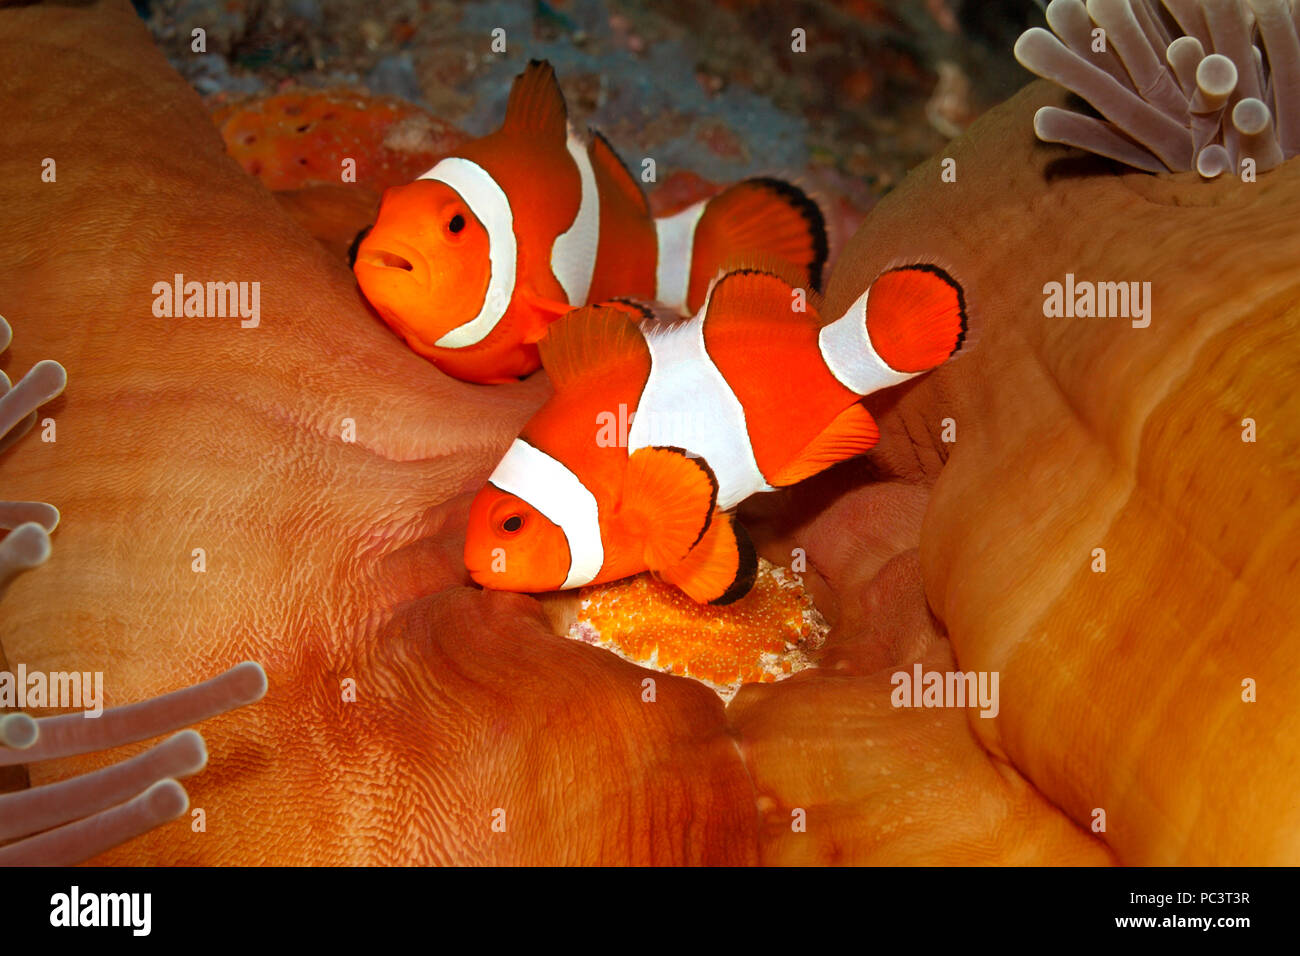 Pair of Clown Anemonefish, Amphiprion ocellaris, tending eggs laid at base of the host Magnificent Anemone, Heteractis magnifica. Tulamben, Bali. Stock Photo